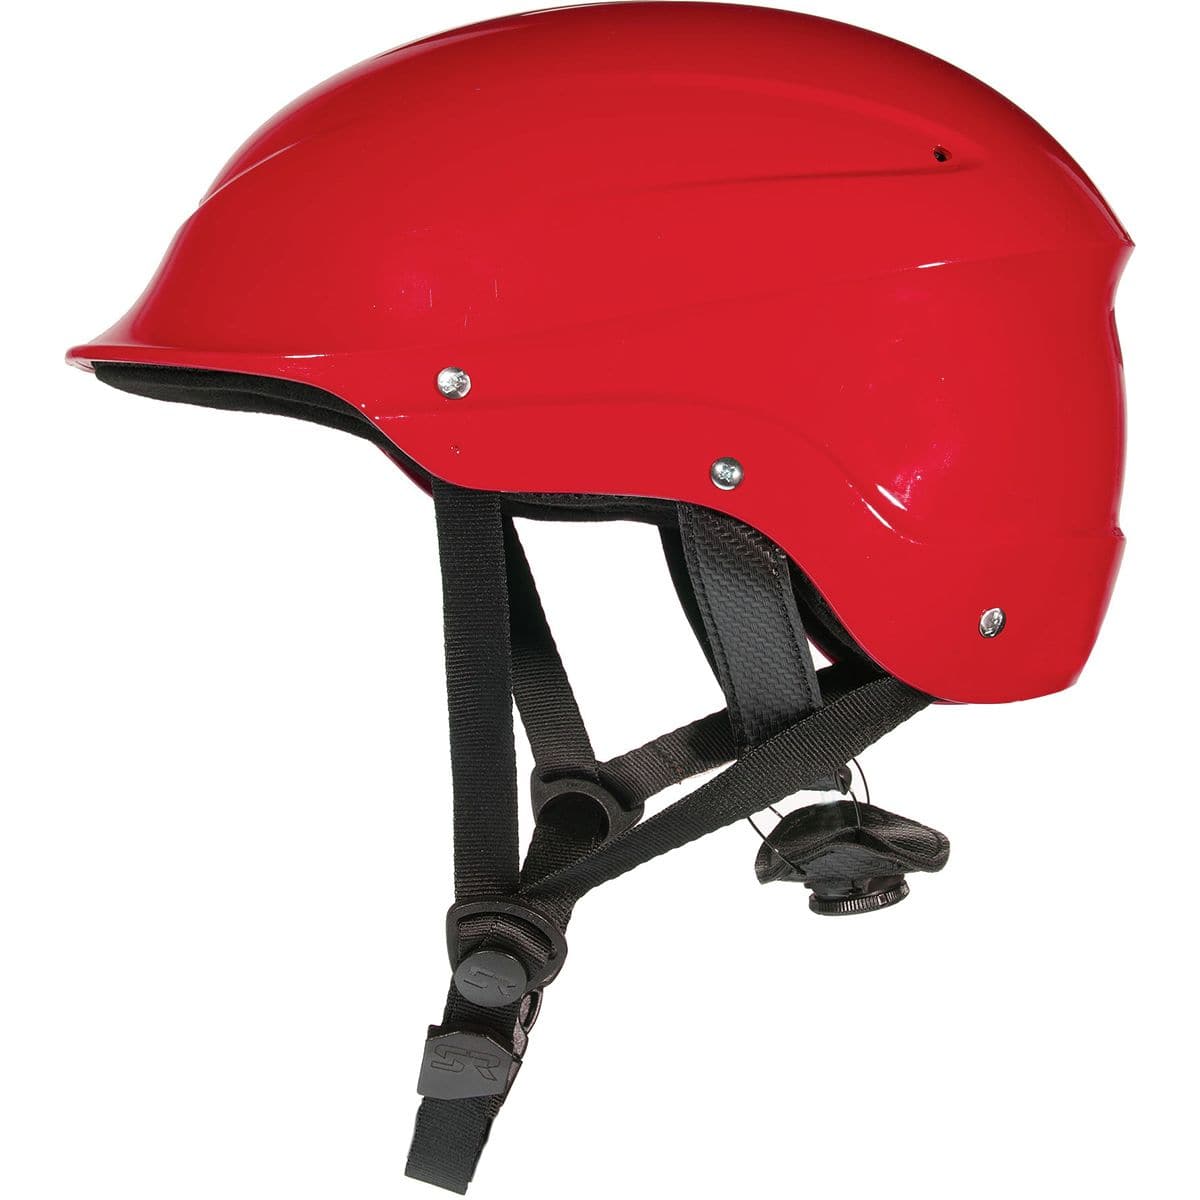 Featuring the Standard Halfcut Helmet helmet manufactured by Shred Ready shown here from a fourth angle.